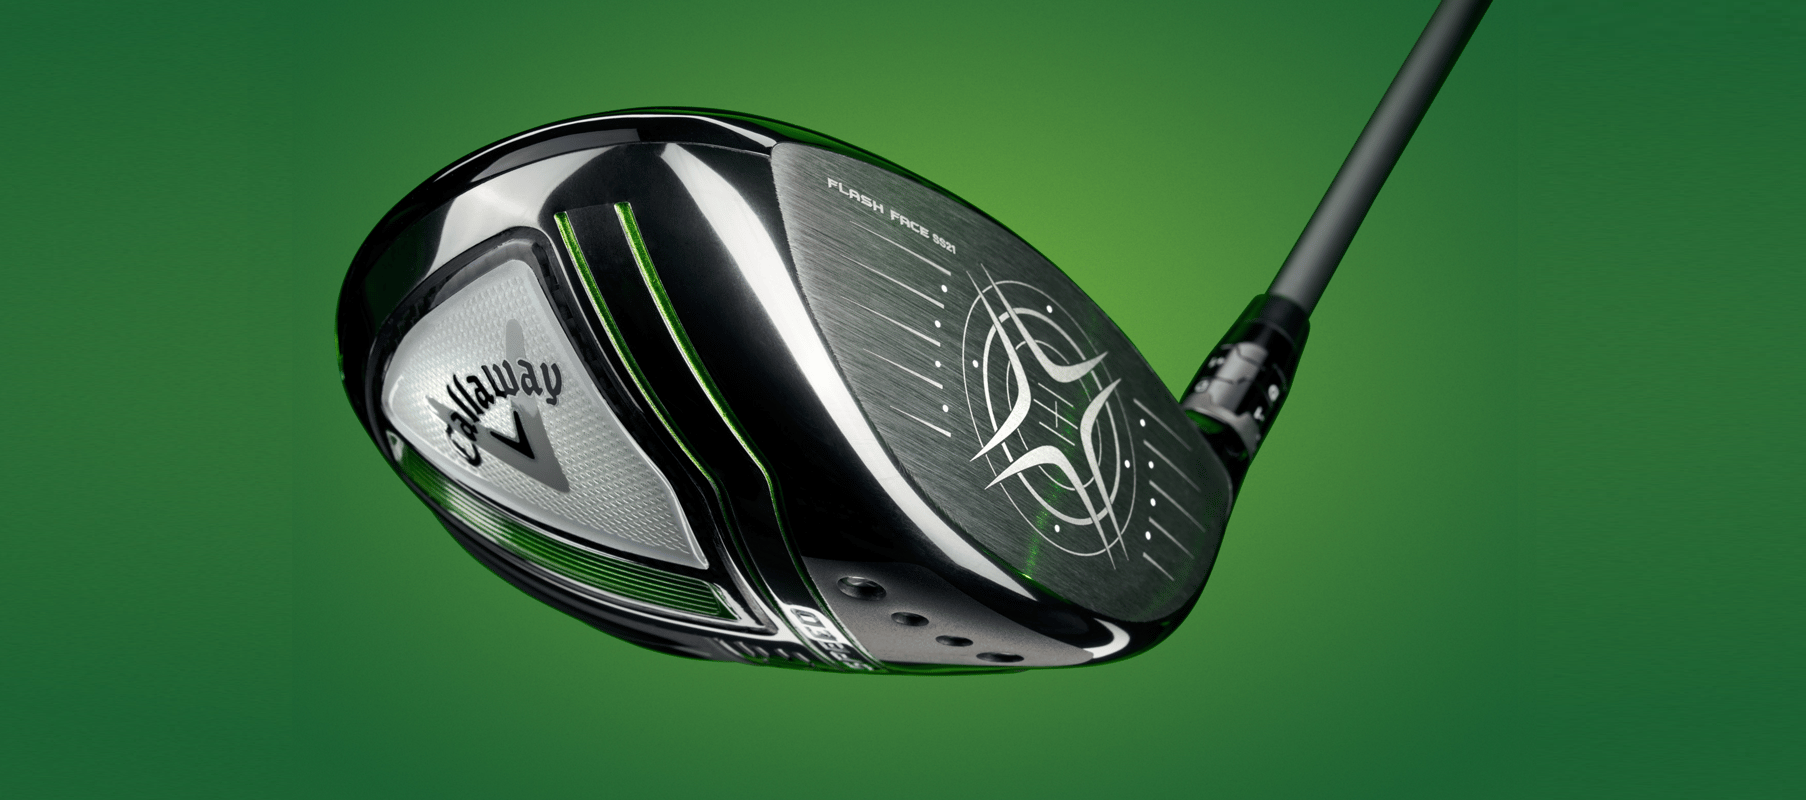 A golf wedge - a Callaway Golf Co product - is shown on a green backdrop.